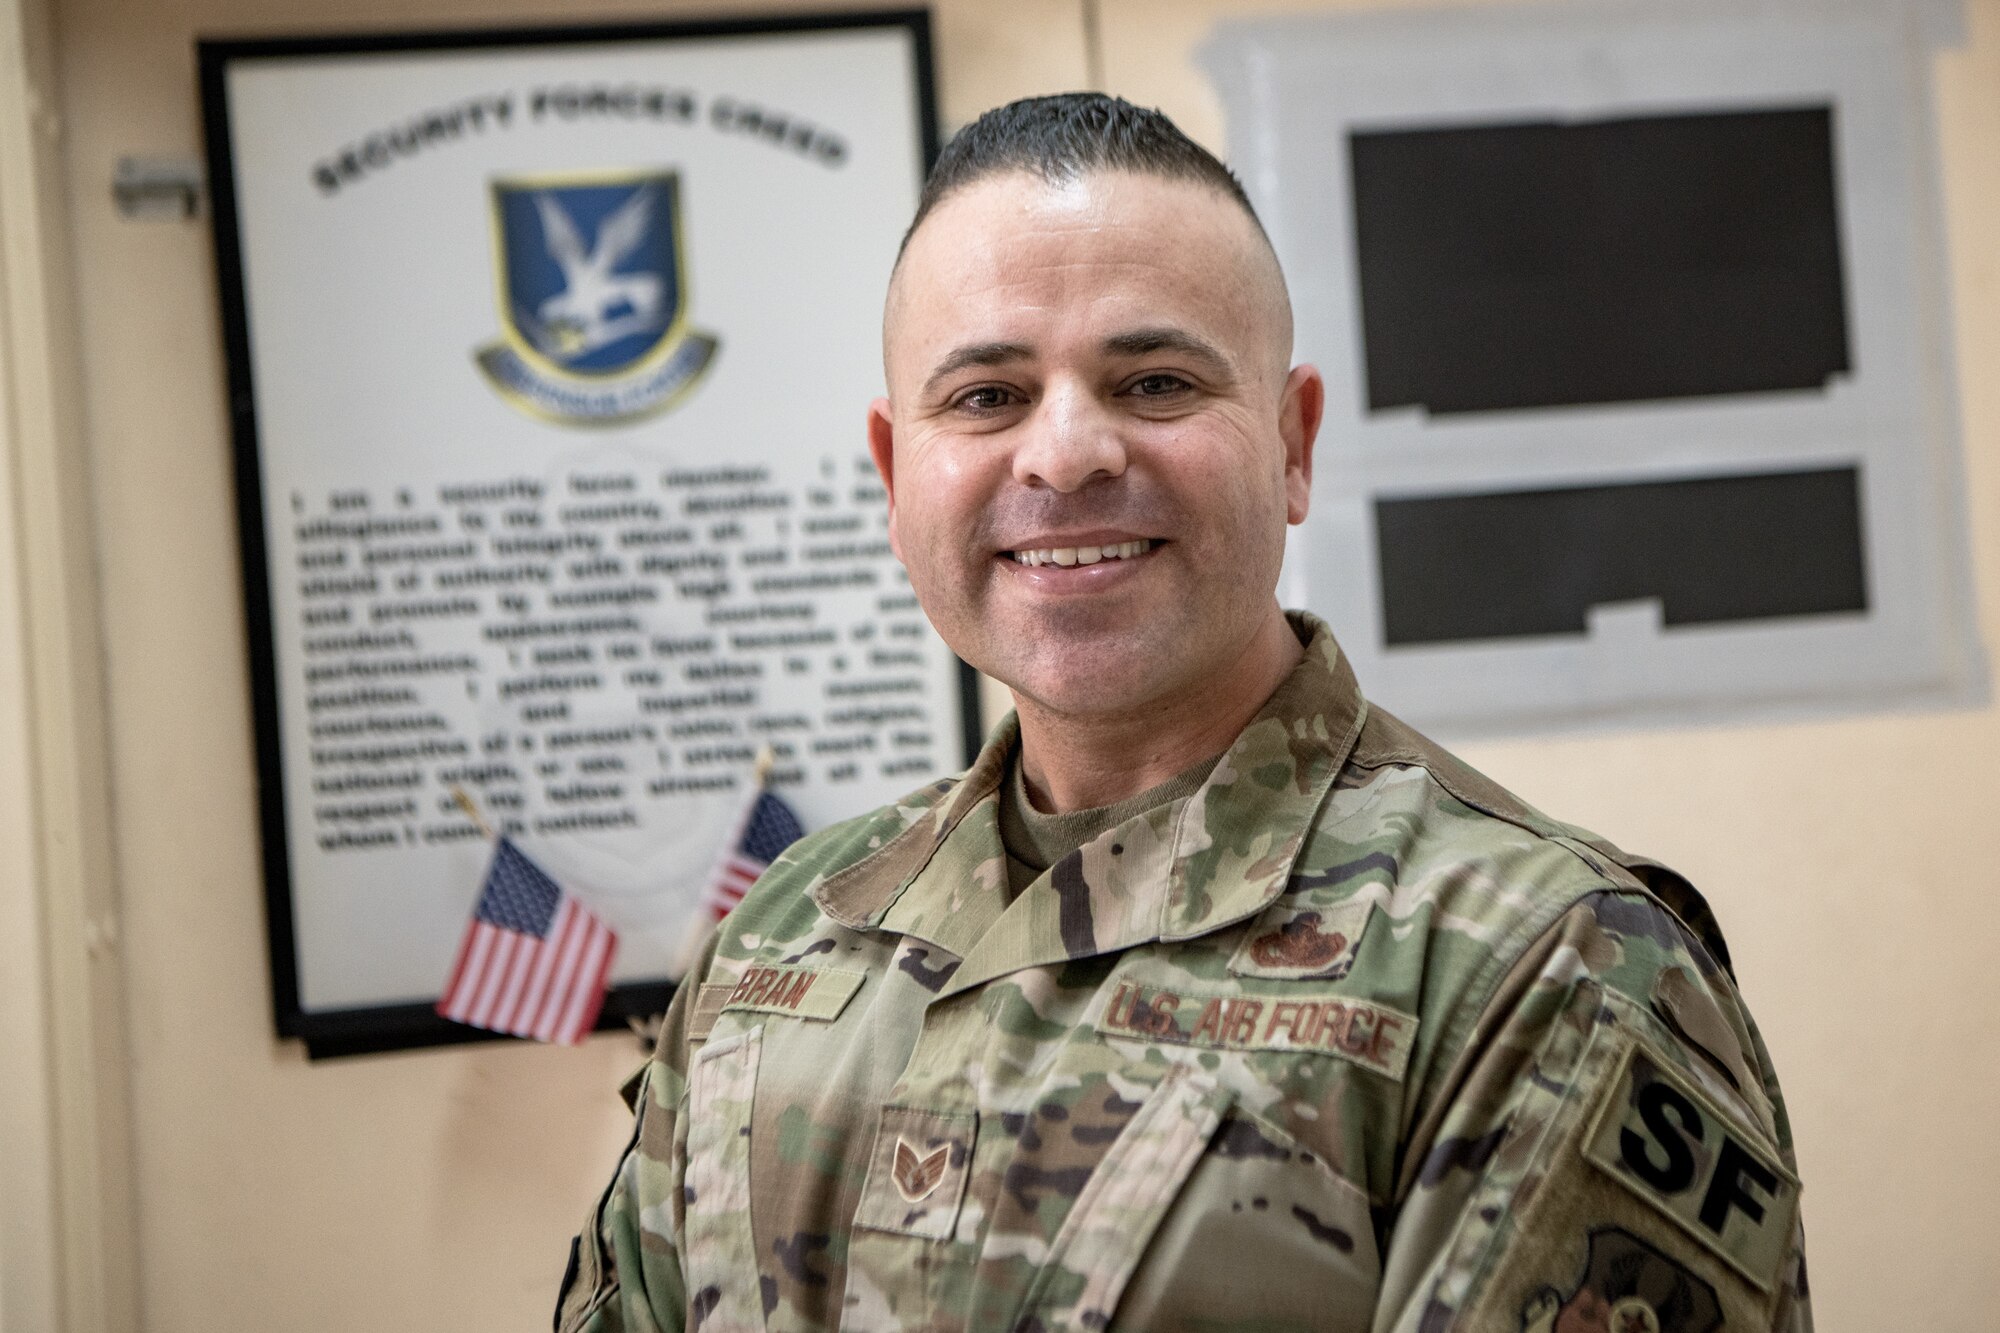 Embraced by a nation: How a 379th ESFS Airman is ensuring resolute partnerships